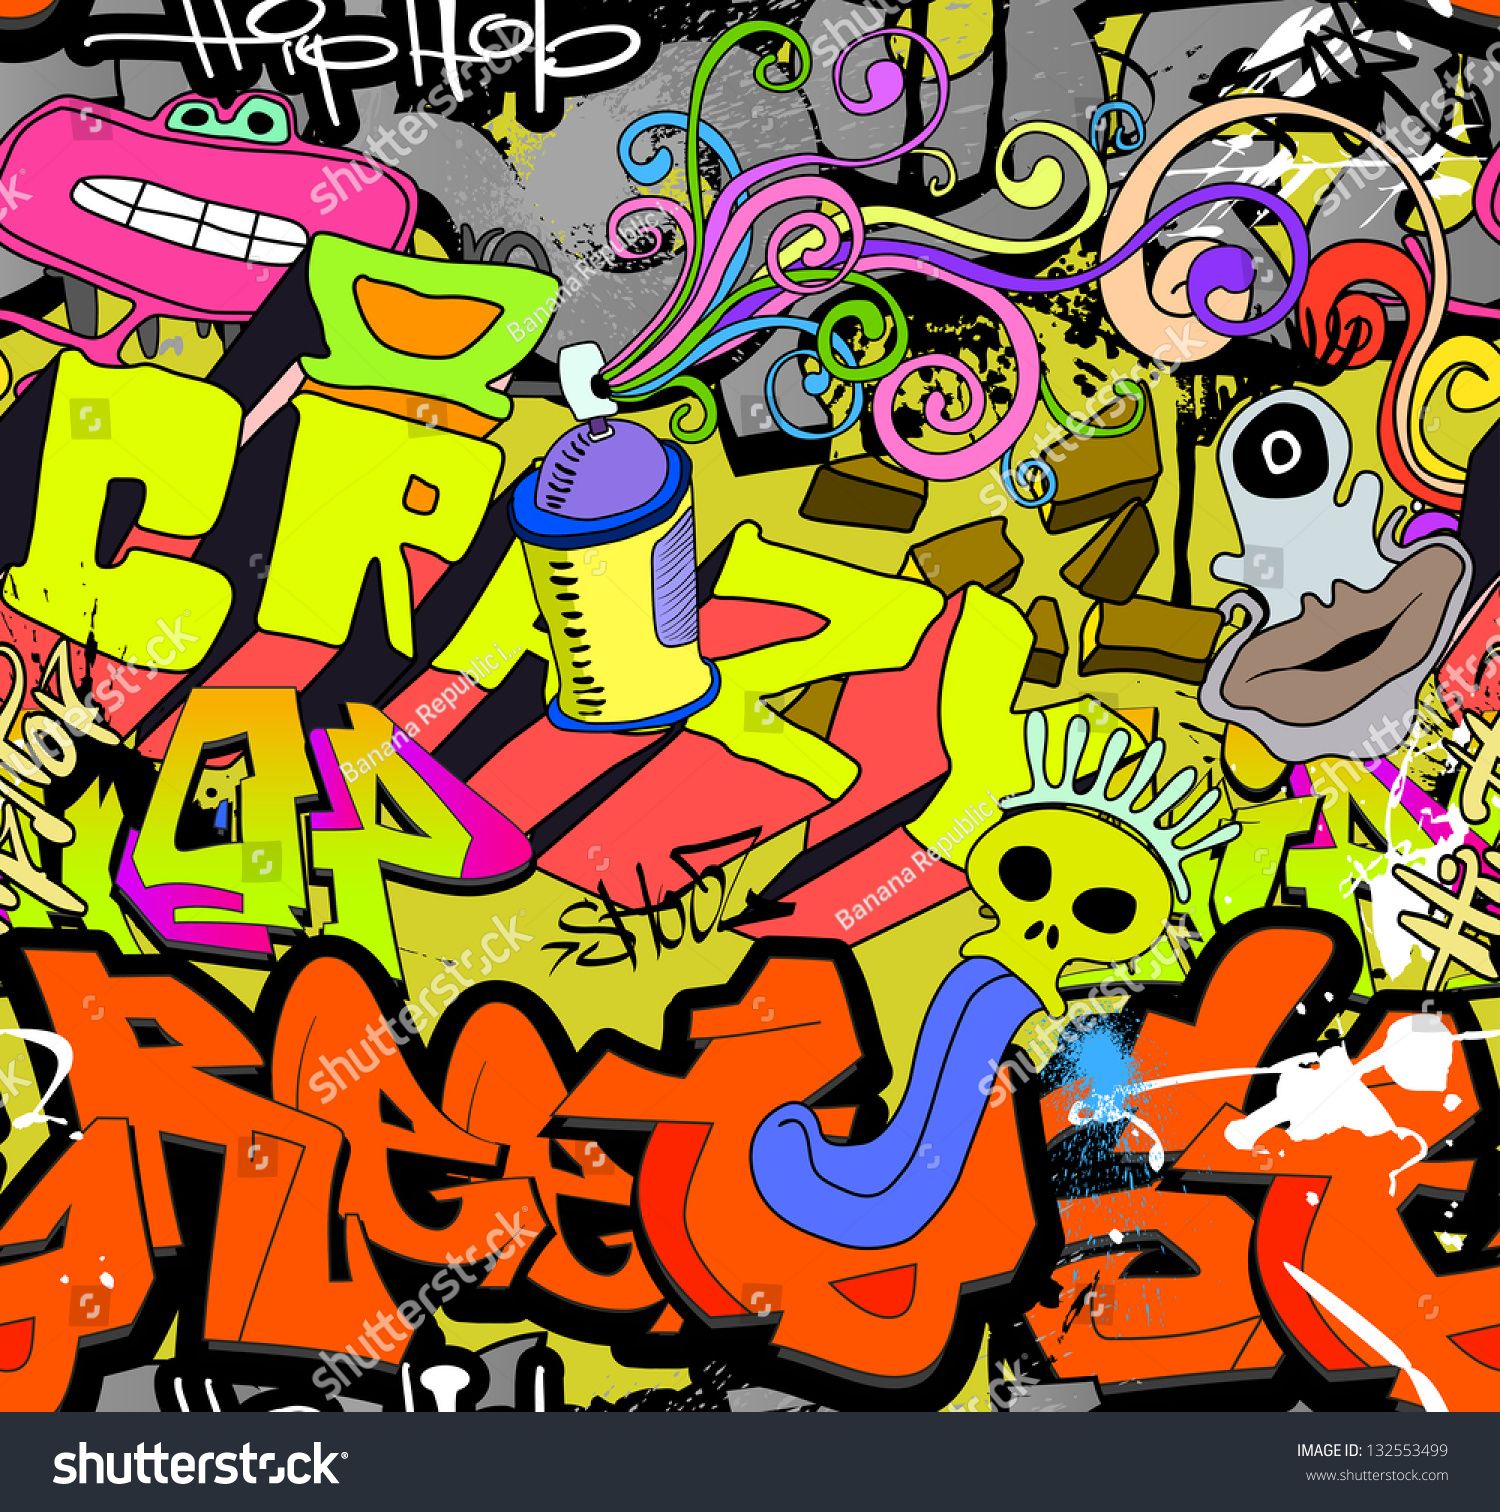 Graffiti Wall Art Background Hiphop Style Stock Illustration 132553499 |  Shutterstock In Recent Graffiti Style Wall Art (View 12 of 20)